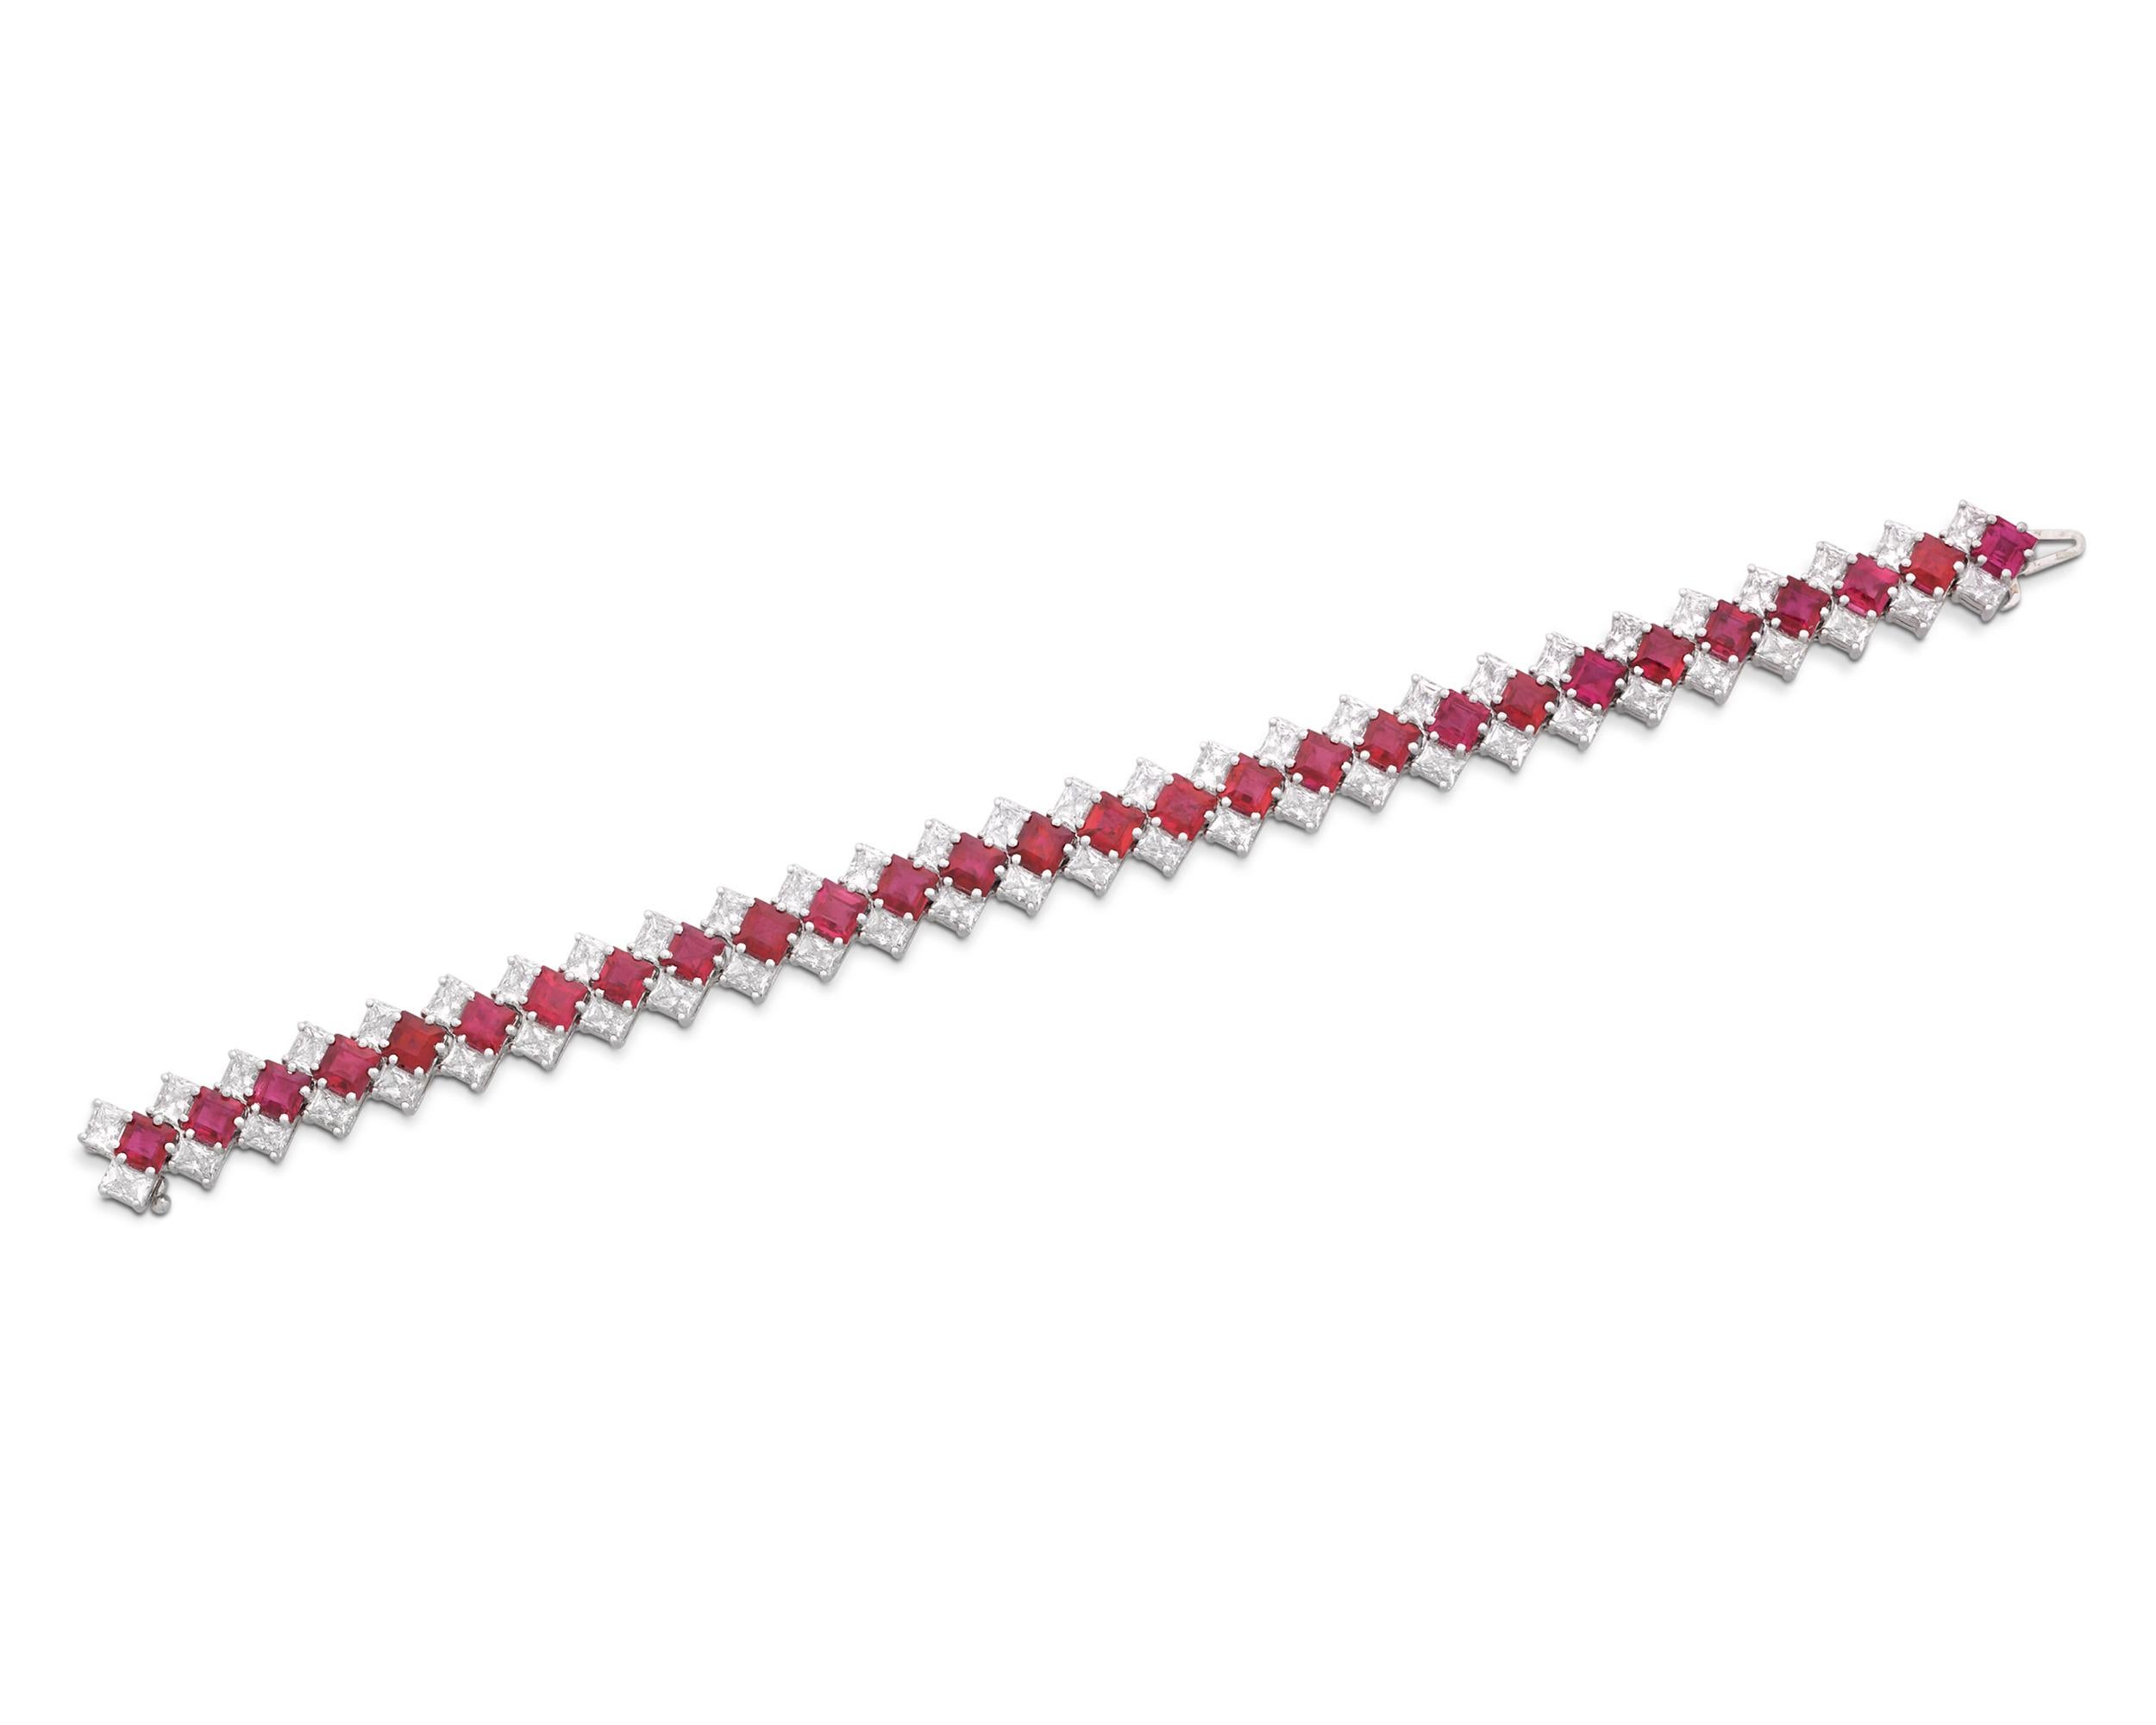 Lush red Burma rubies totaling 16.80 carats alternate with white diamonds in this luxurious bracelet. Rubies hailing from the mines of Burma are among the rarest and most coveted in the world, with the most prized examples displaying a rich crimson